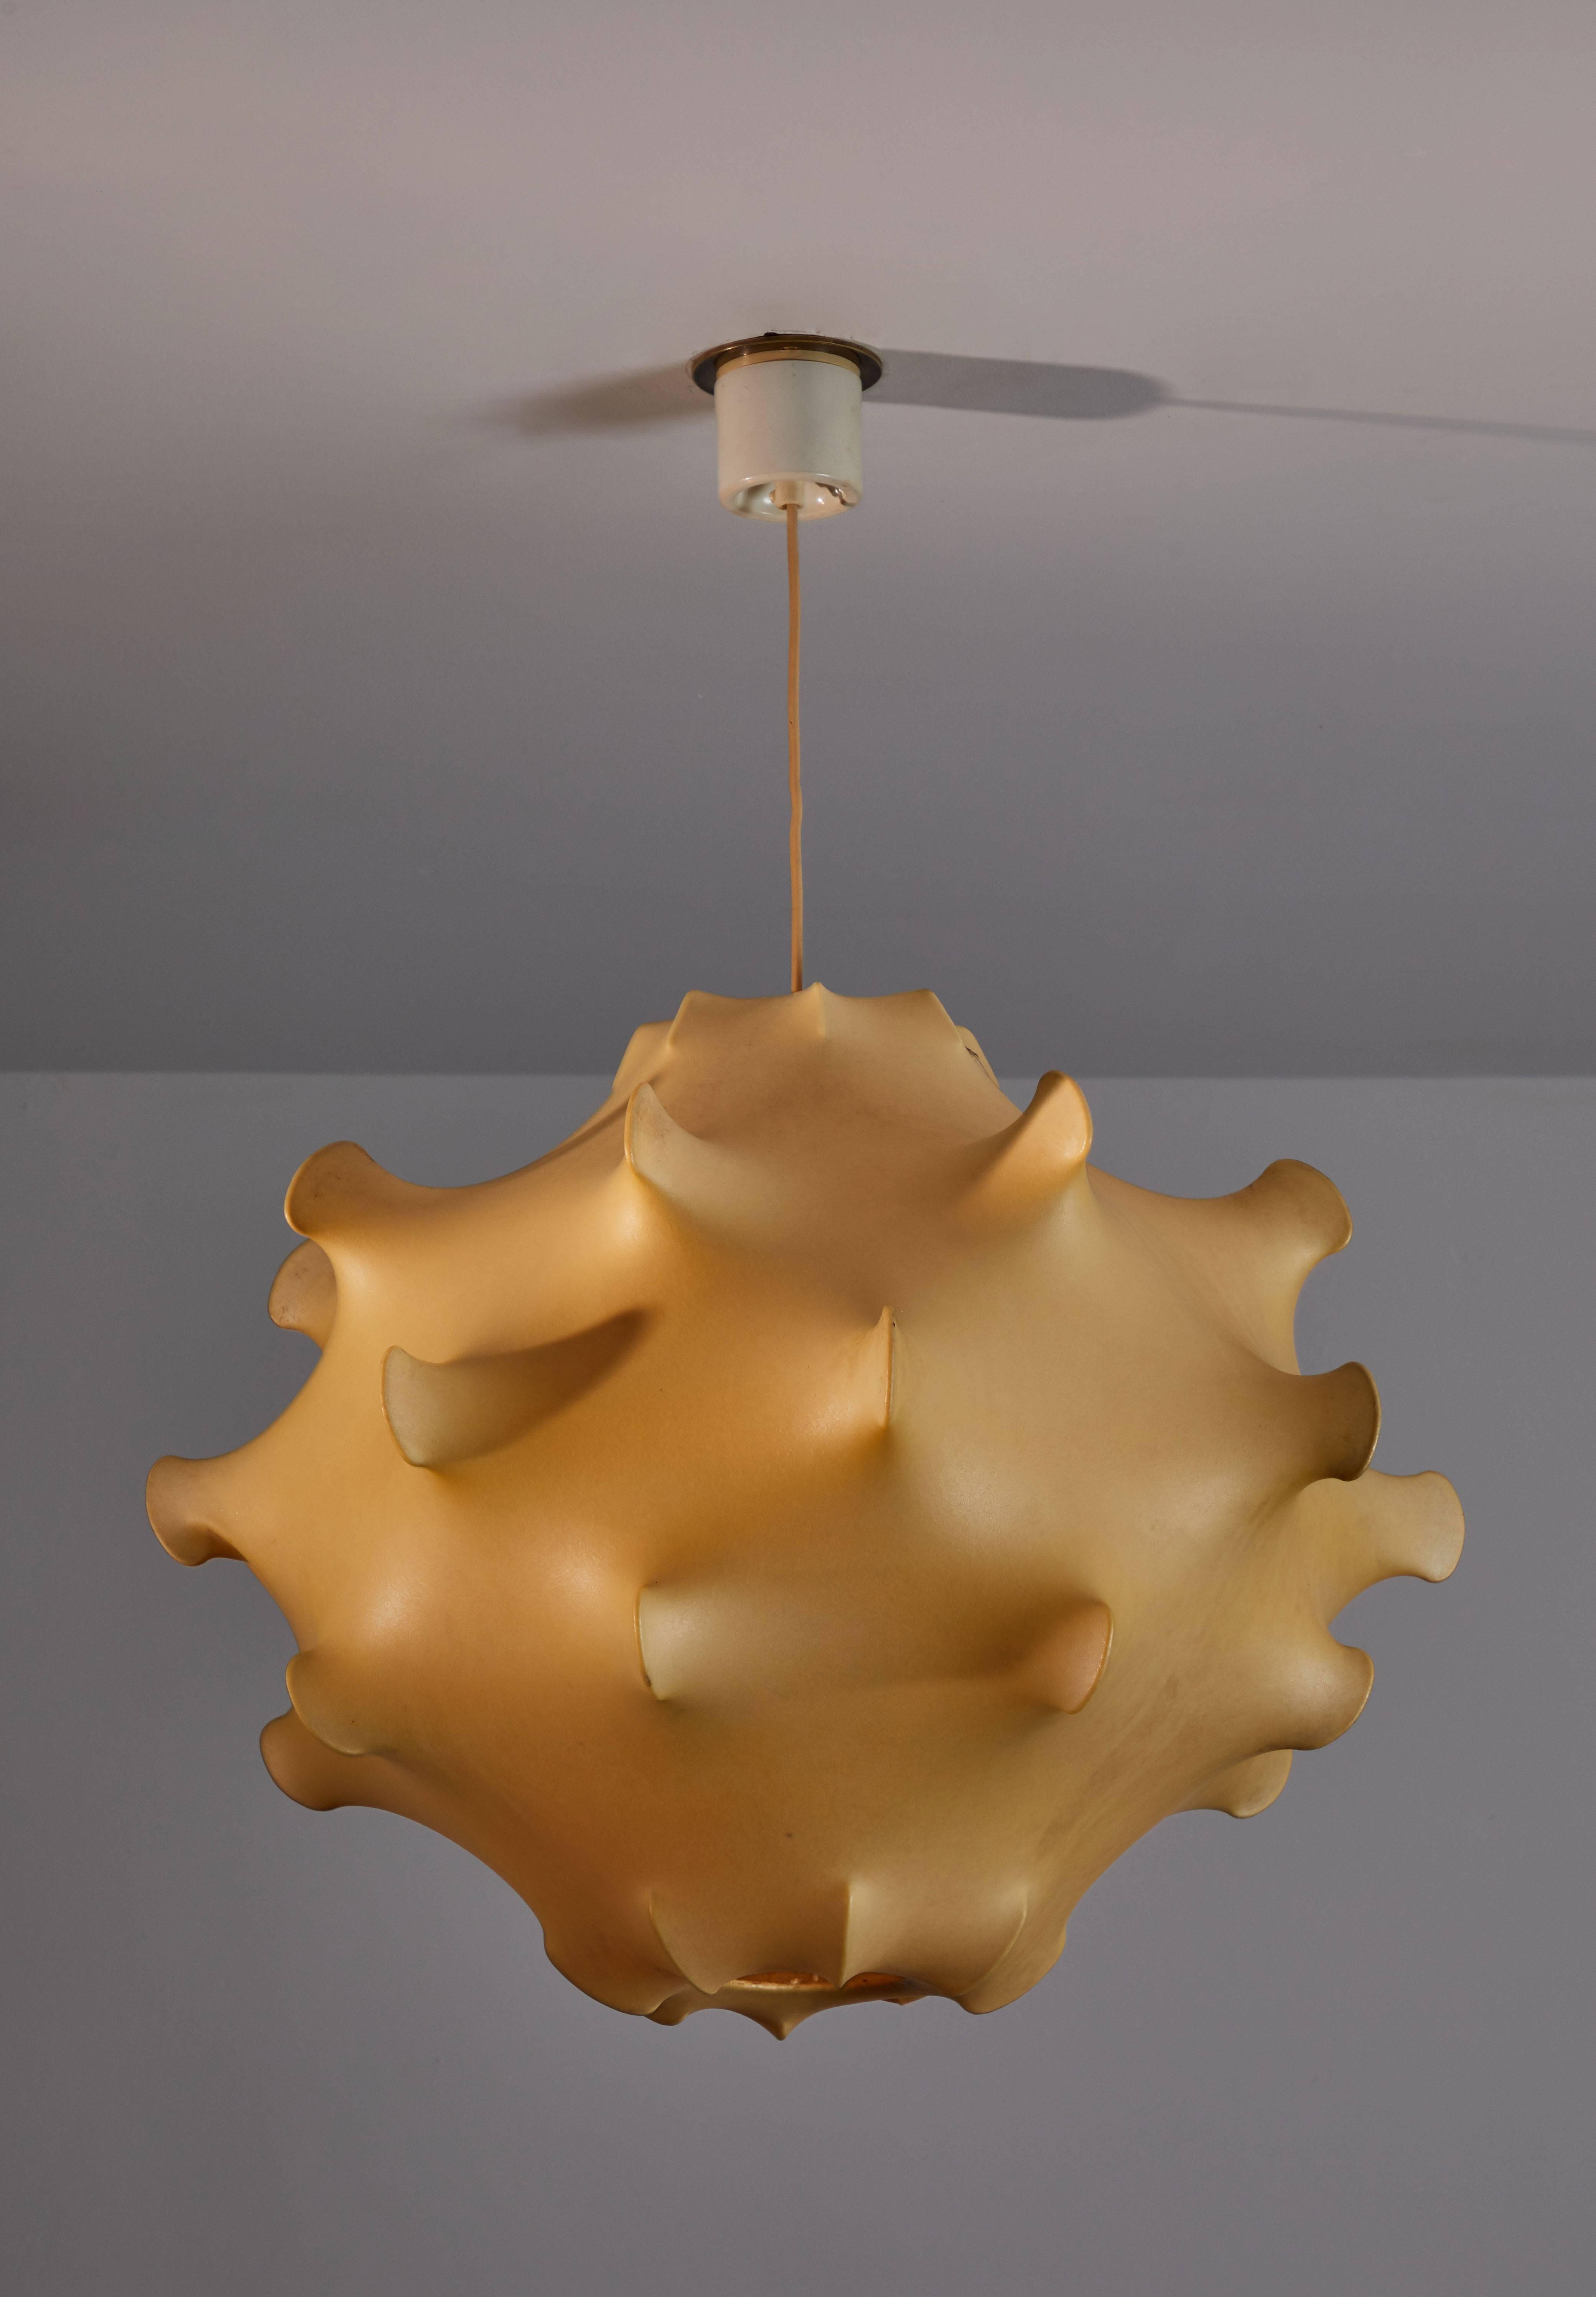 Taraxacum suspension light by Achille & Pier Giacomo Castiglioni for Flos. Designed and manufactured in Italy, circa 1960s. Plastic polymer resin applied with spraying technique on to enameled iron frame. Rewired for US junction boxes. Customized